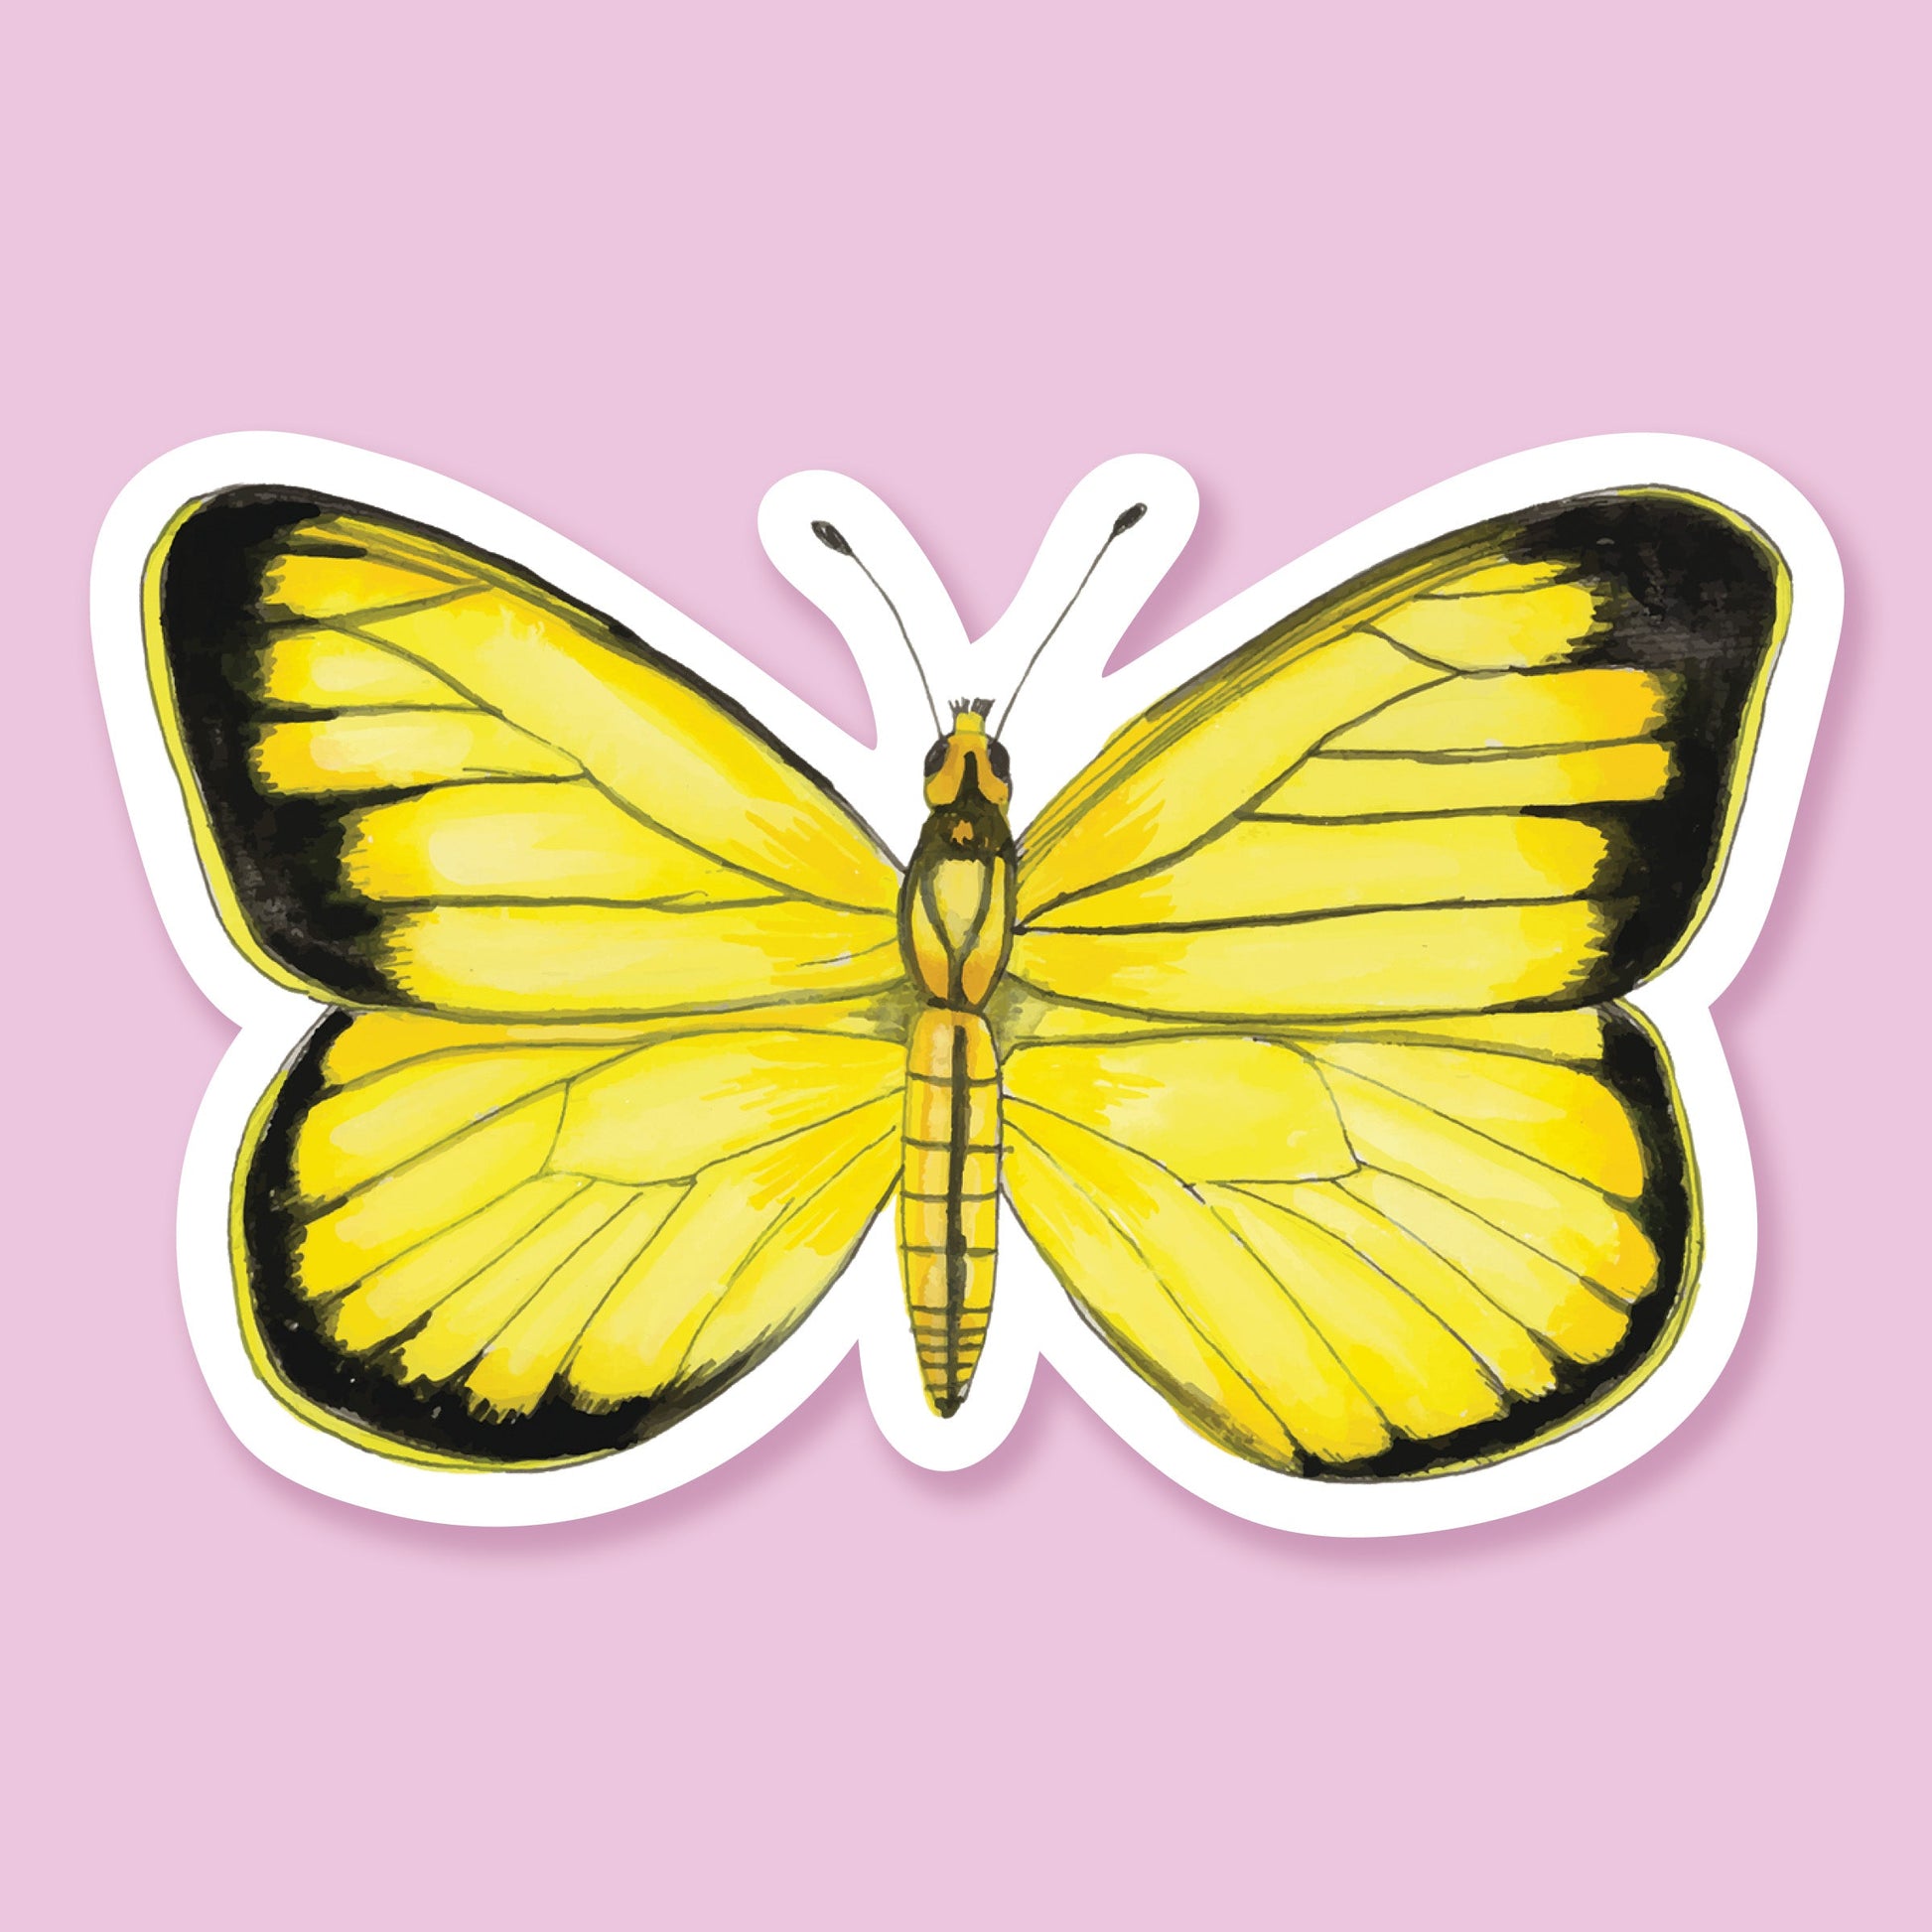 Yellow and black hand painted butterfly with white outline sits atop a light lavender background